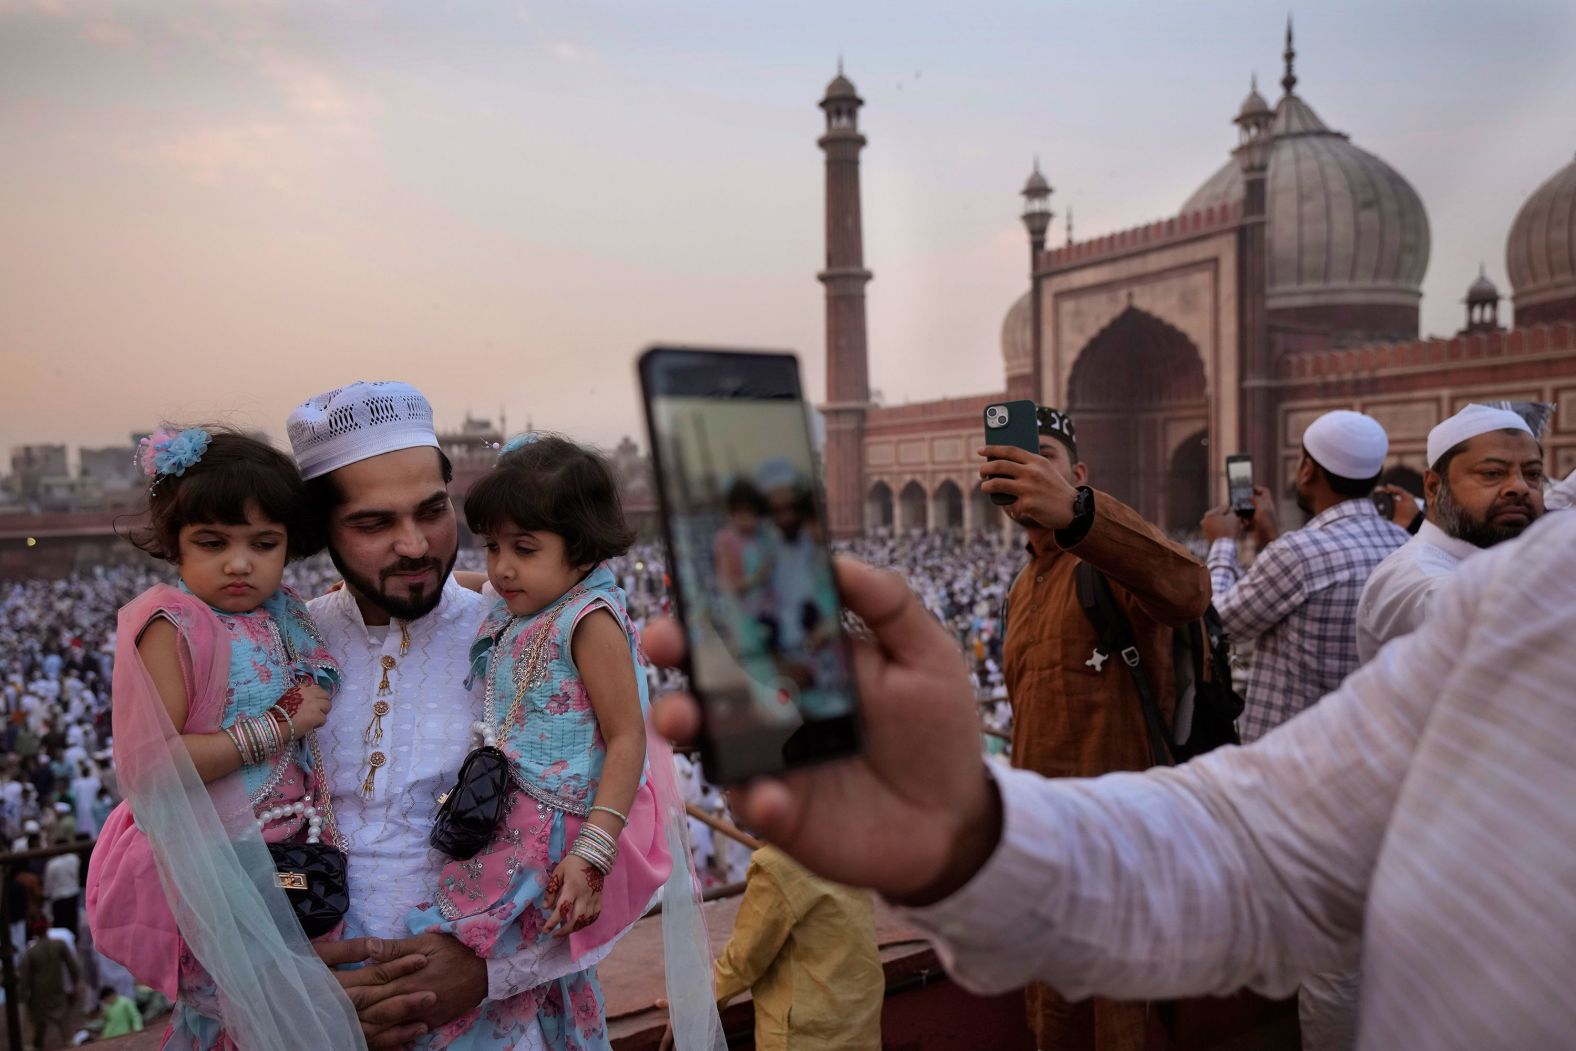 Muslims take selfies with their families after offering Eid al-Fitr prayer at Jama Masjid in New Delhi, India, on Thursday, April 11. <a href="index.php?page=&url=https%3A%2F%2Fwww.cnn.com%2F2024%2F04%2F04%2Fworld%2Fgallery%2Fphotos-this-week-march-28-april-4%2Findex.html" target="_blank">See last week in 31 photos</a>.